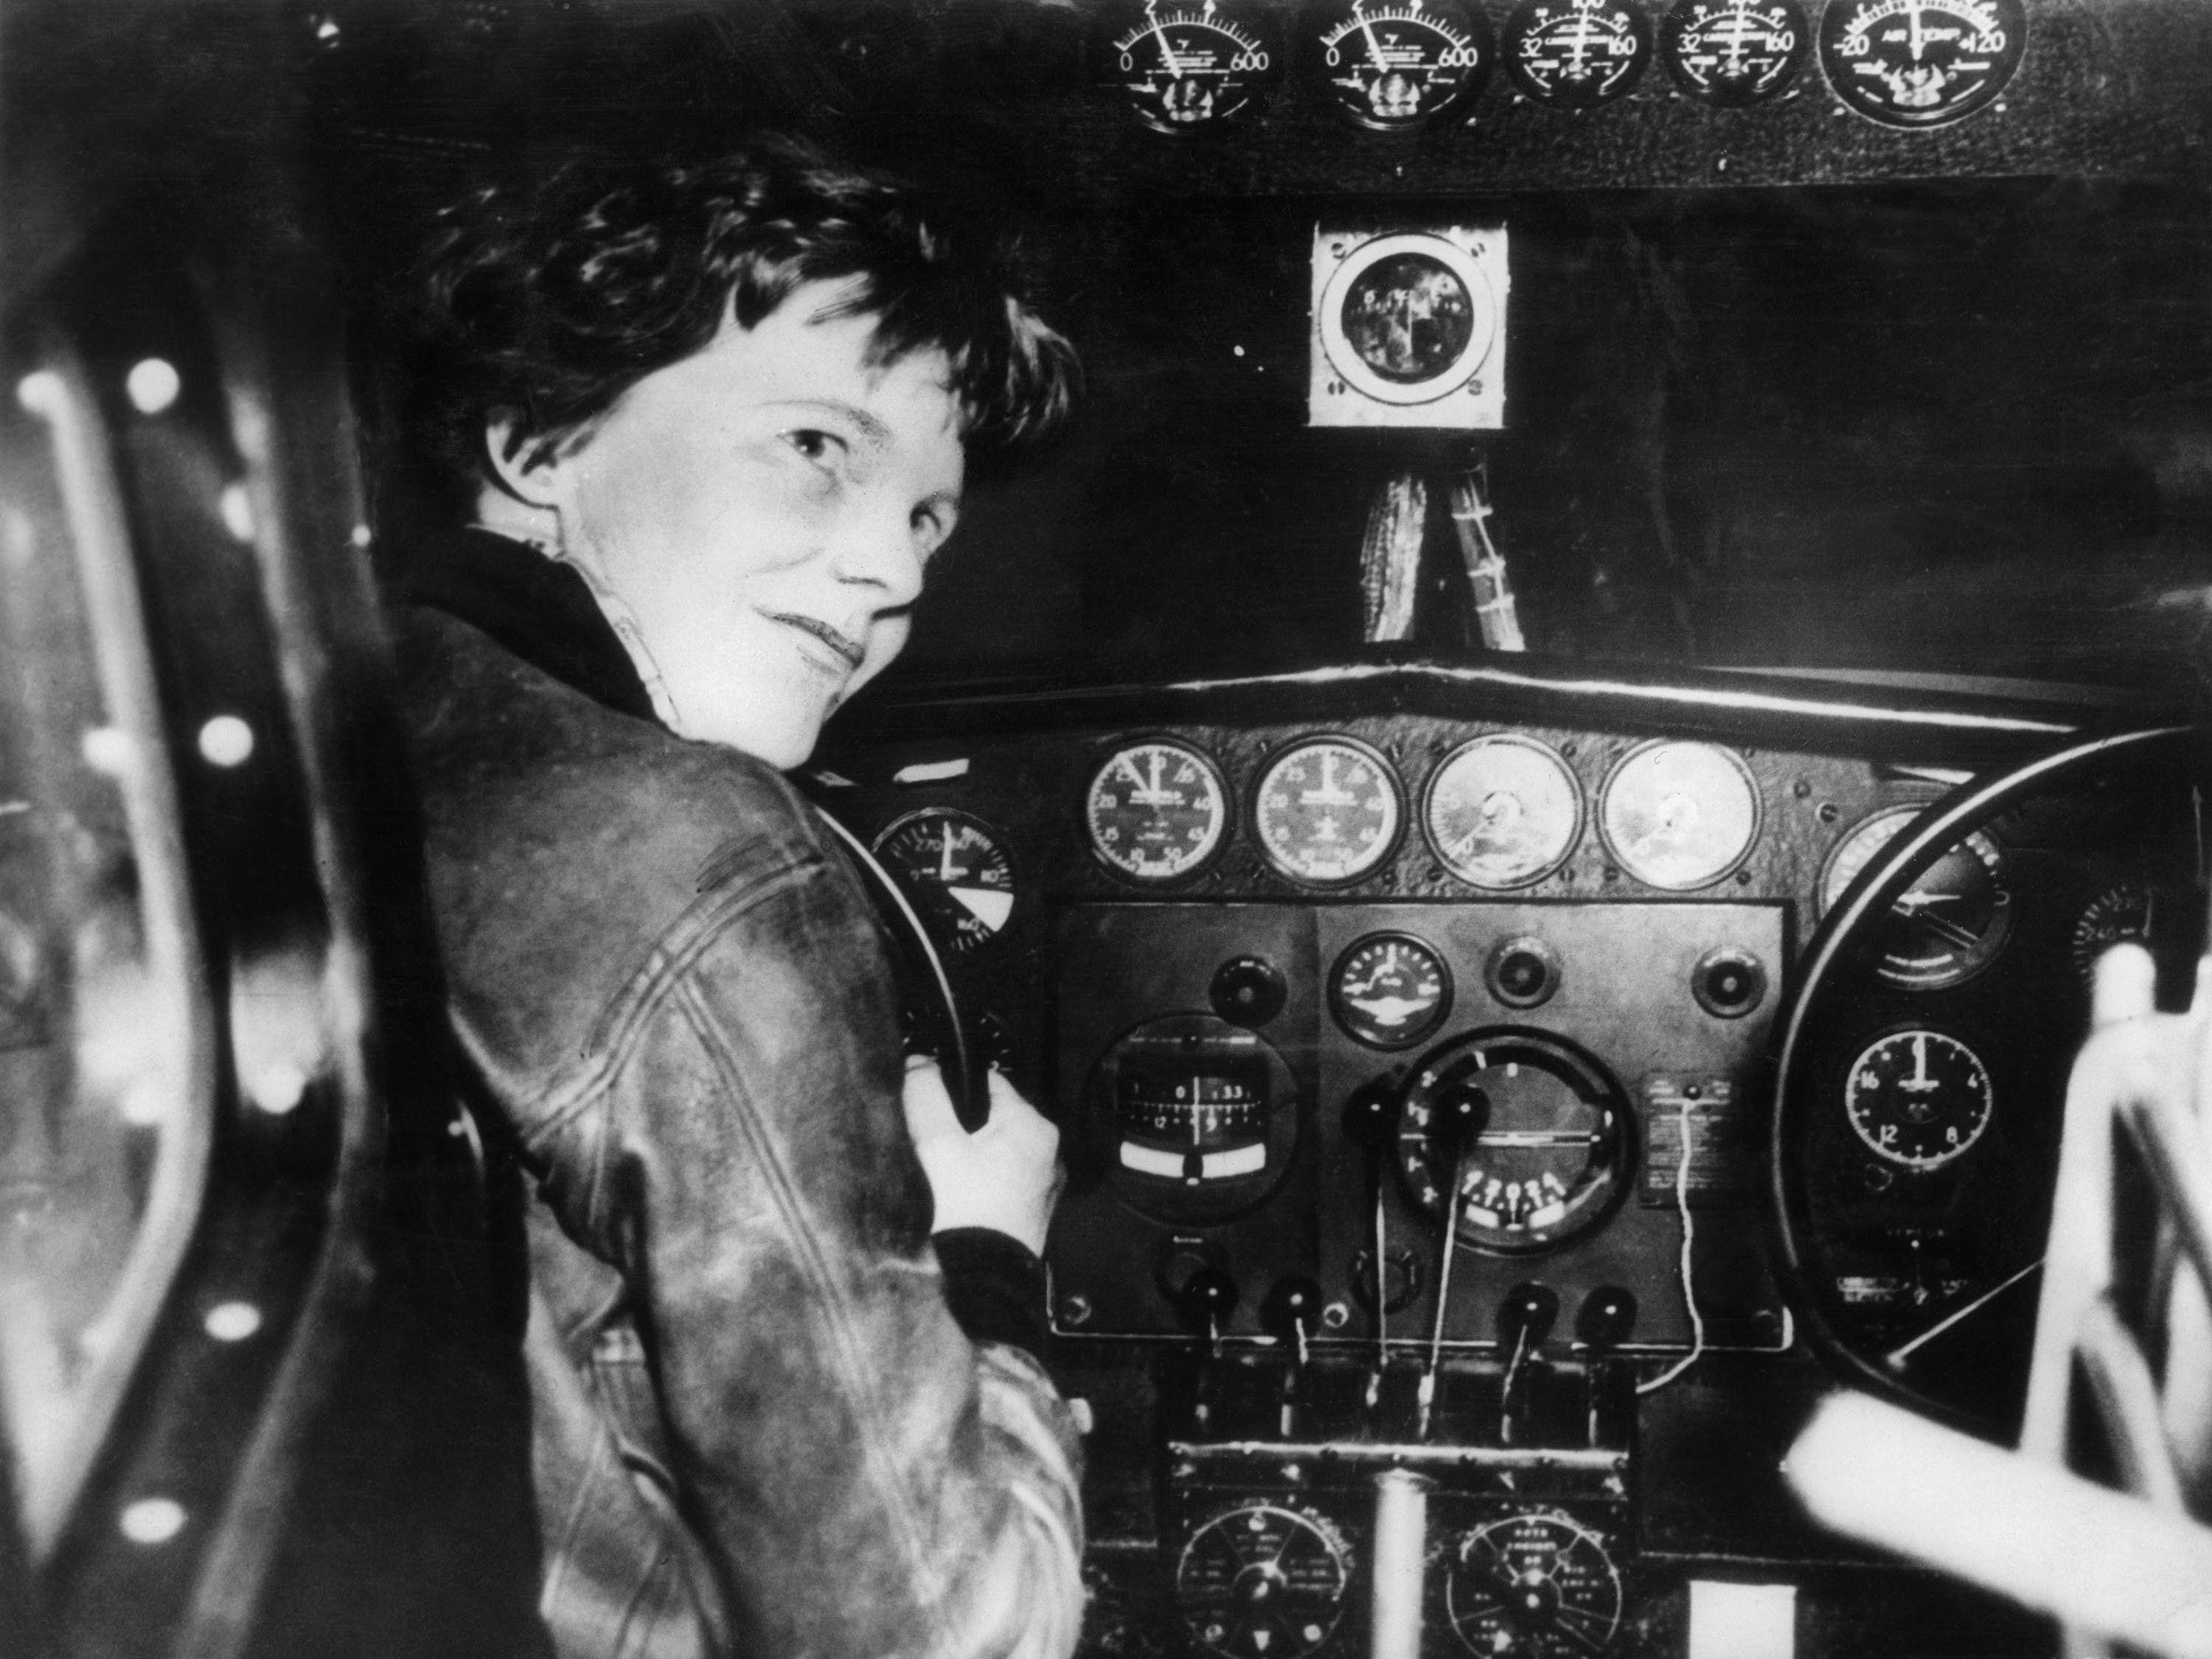 Amelia Earhart May Have Survived Flight, New Photo Suggests